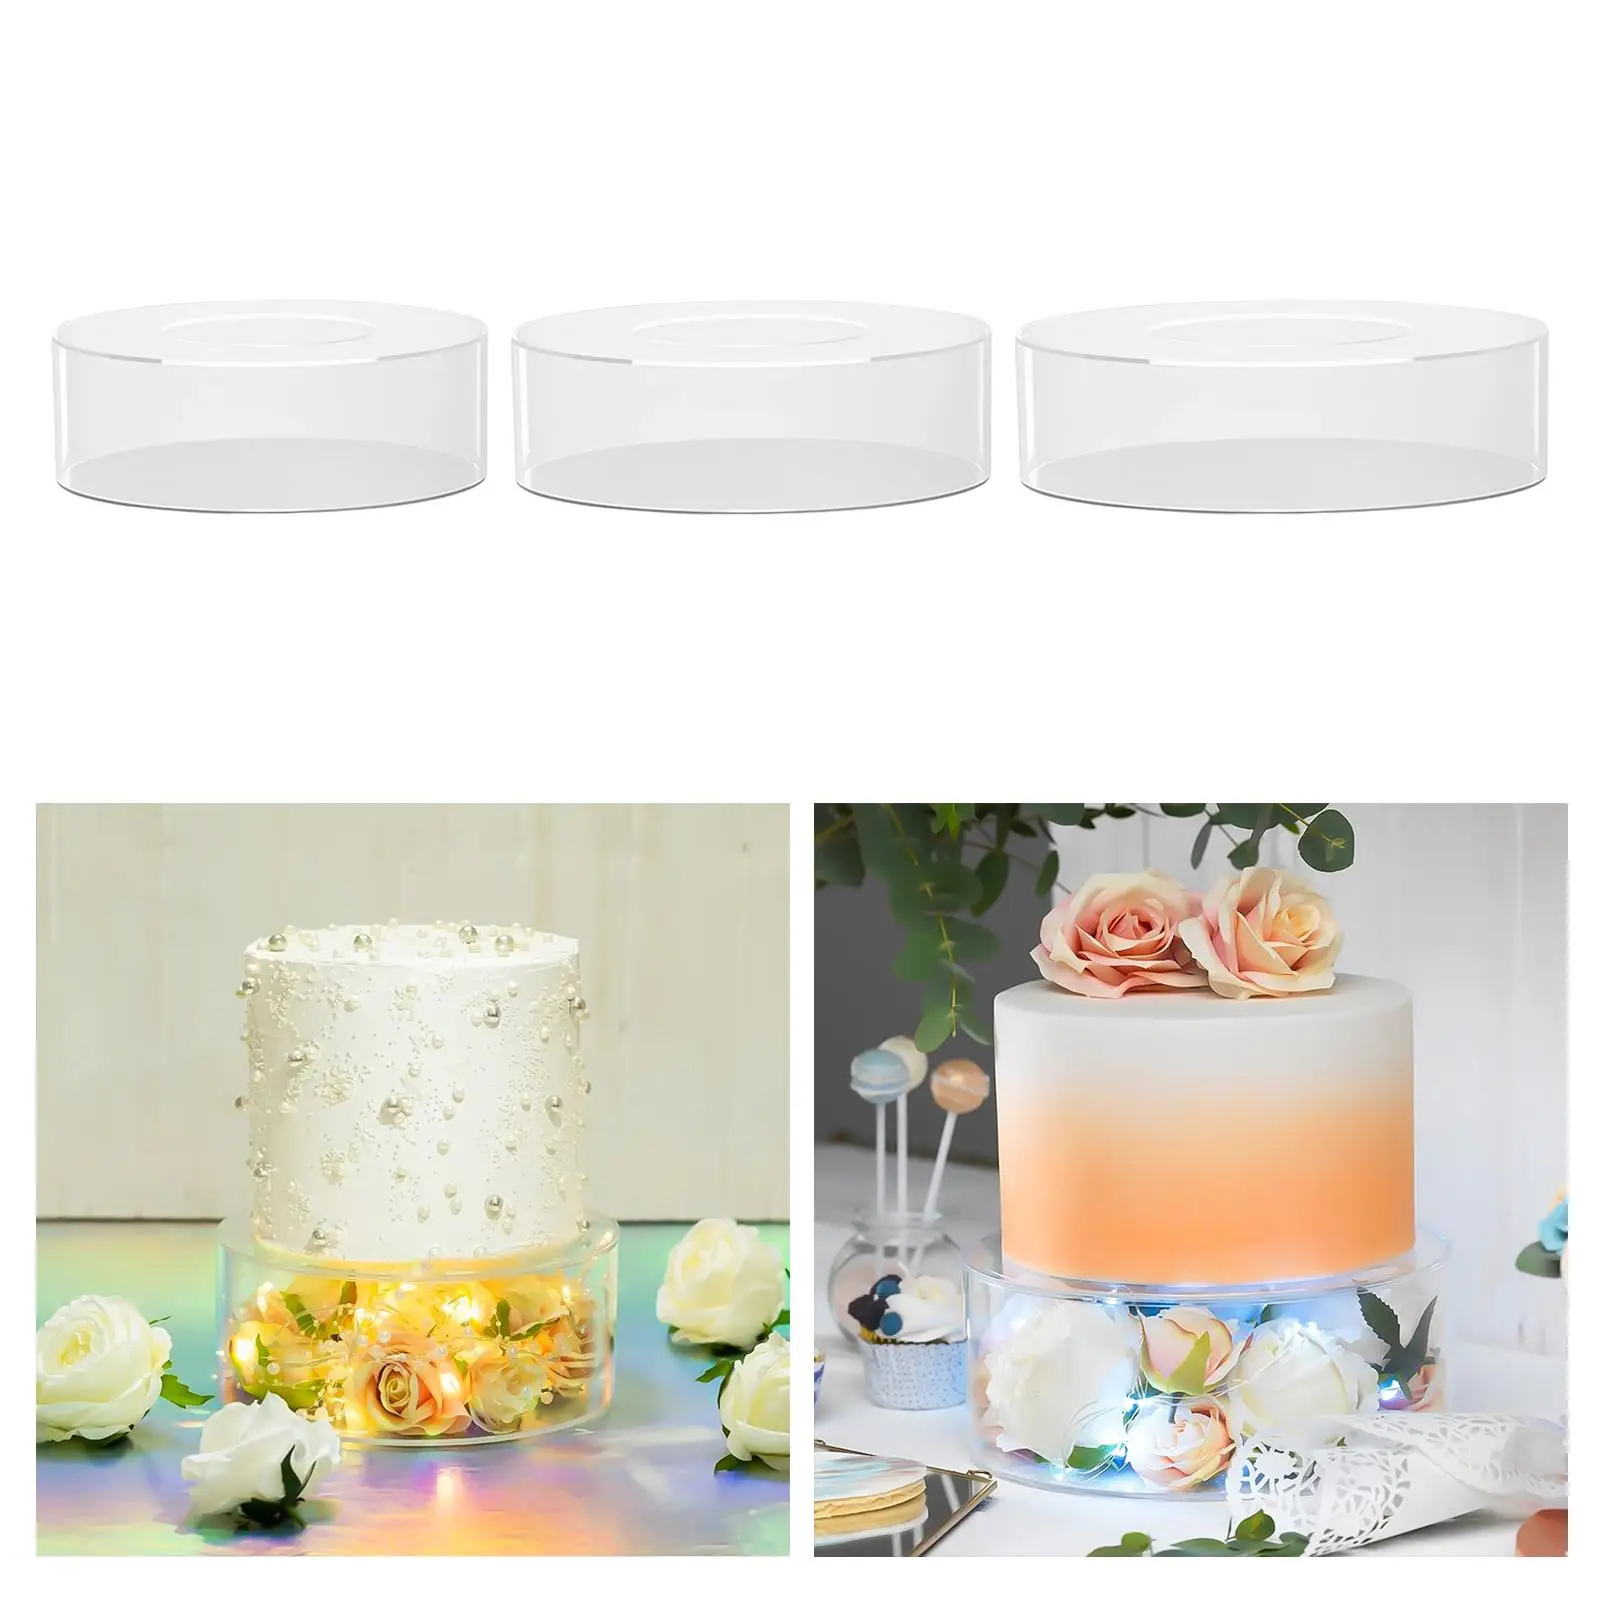 Fillable Cake Stand Cake Stand Display Box Cake Separator Round Cake Display Stand Cake Display Cylinder Round for Display Food